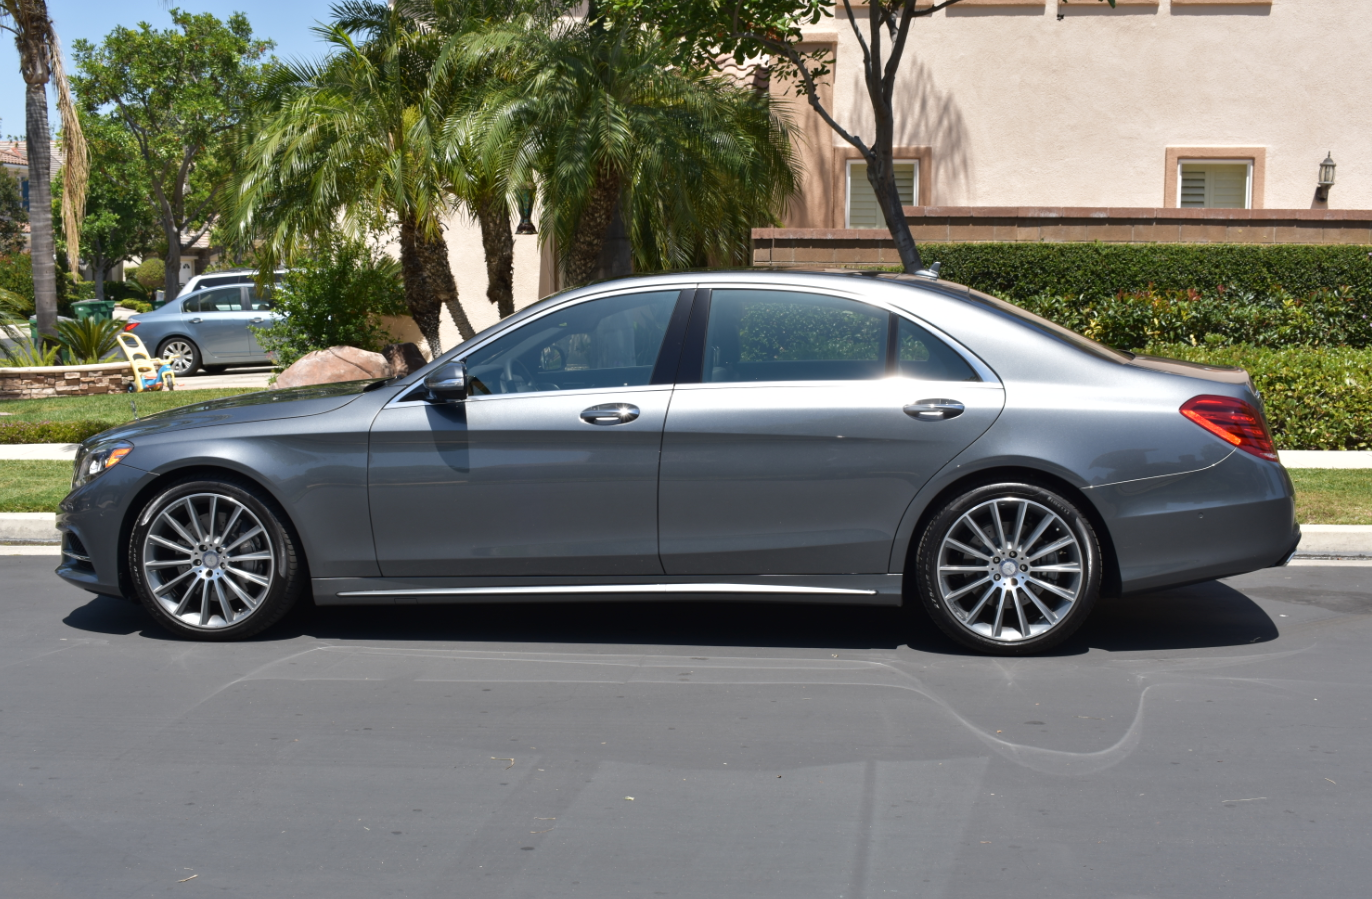 2017 Mercedes-Benz S550 - LIKE NEW 2017 MERCEDES-BENZ S550 (MOTIVATED SELLER) - Used - Irvine, CA 92620, United States